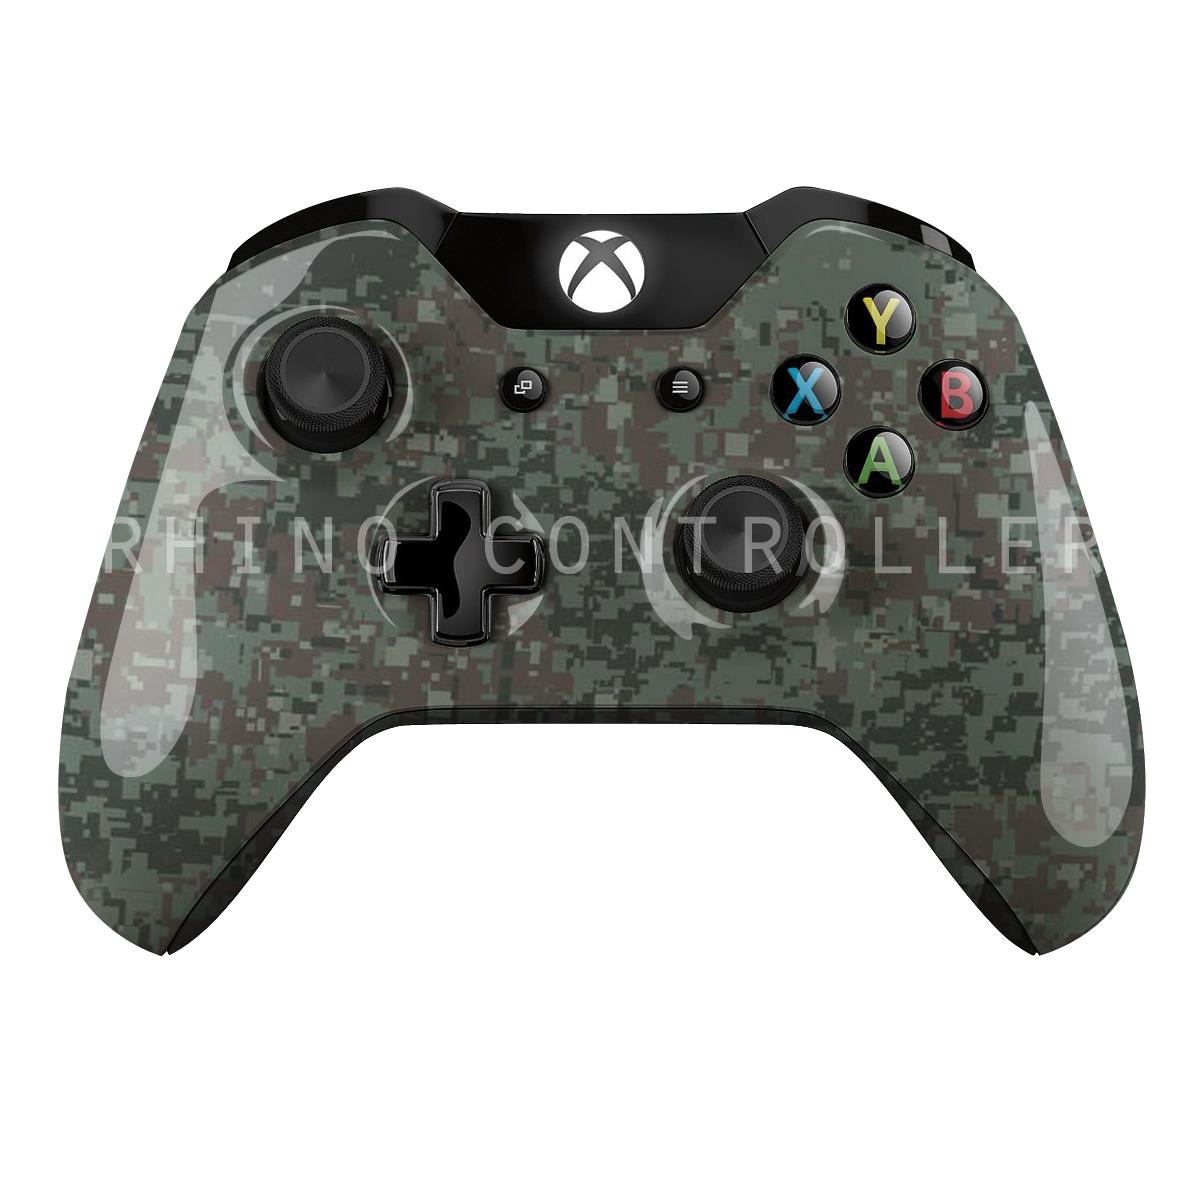 Custom XBOX One controller Wireless Glossy WTP 275 Tiger Stripe Urban Digtial Custom Painted  Without Mods